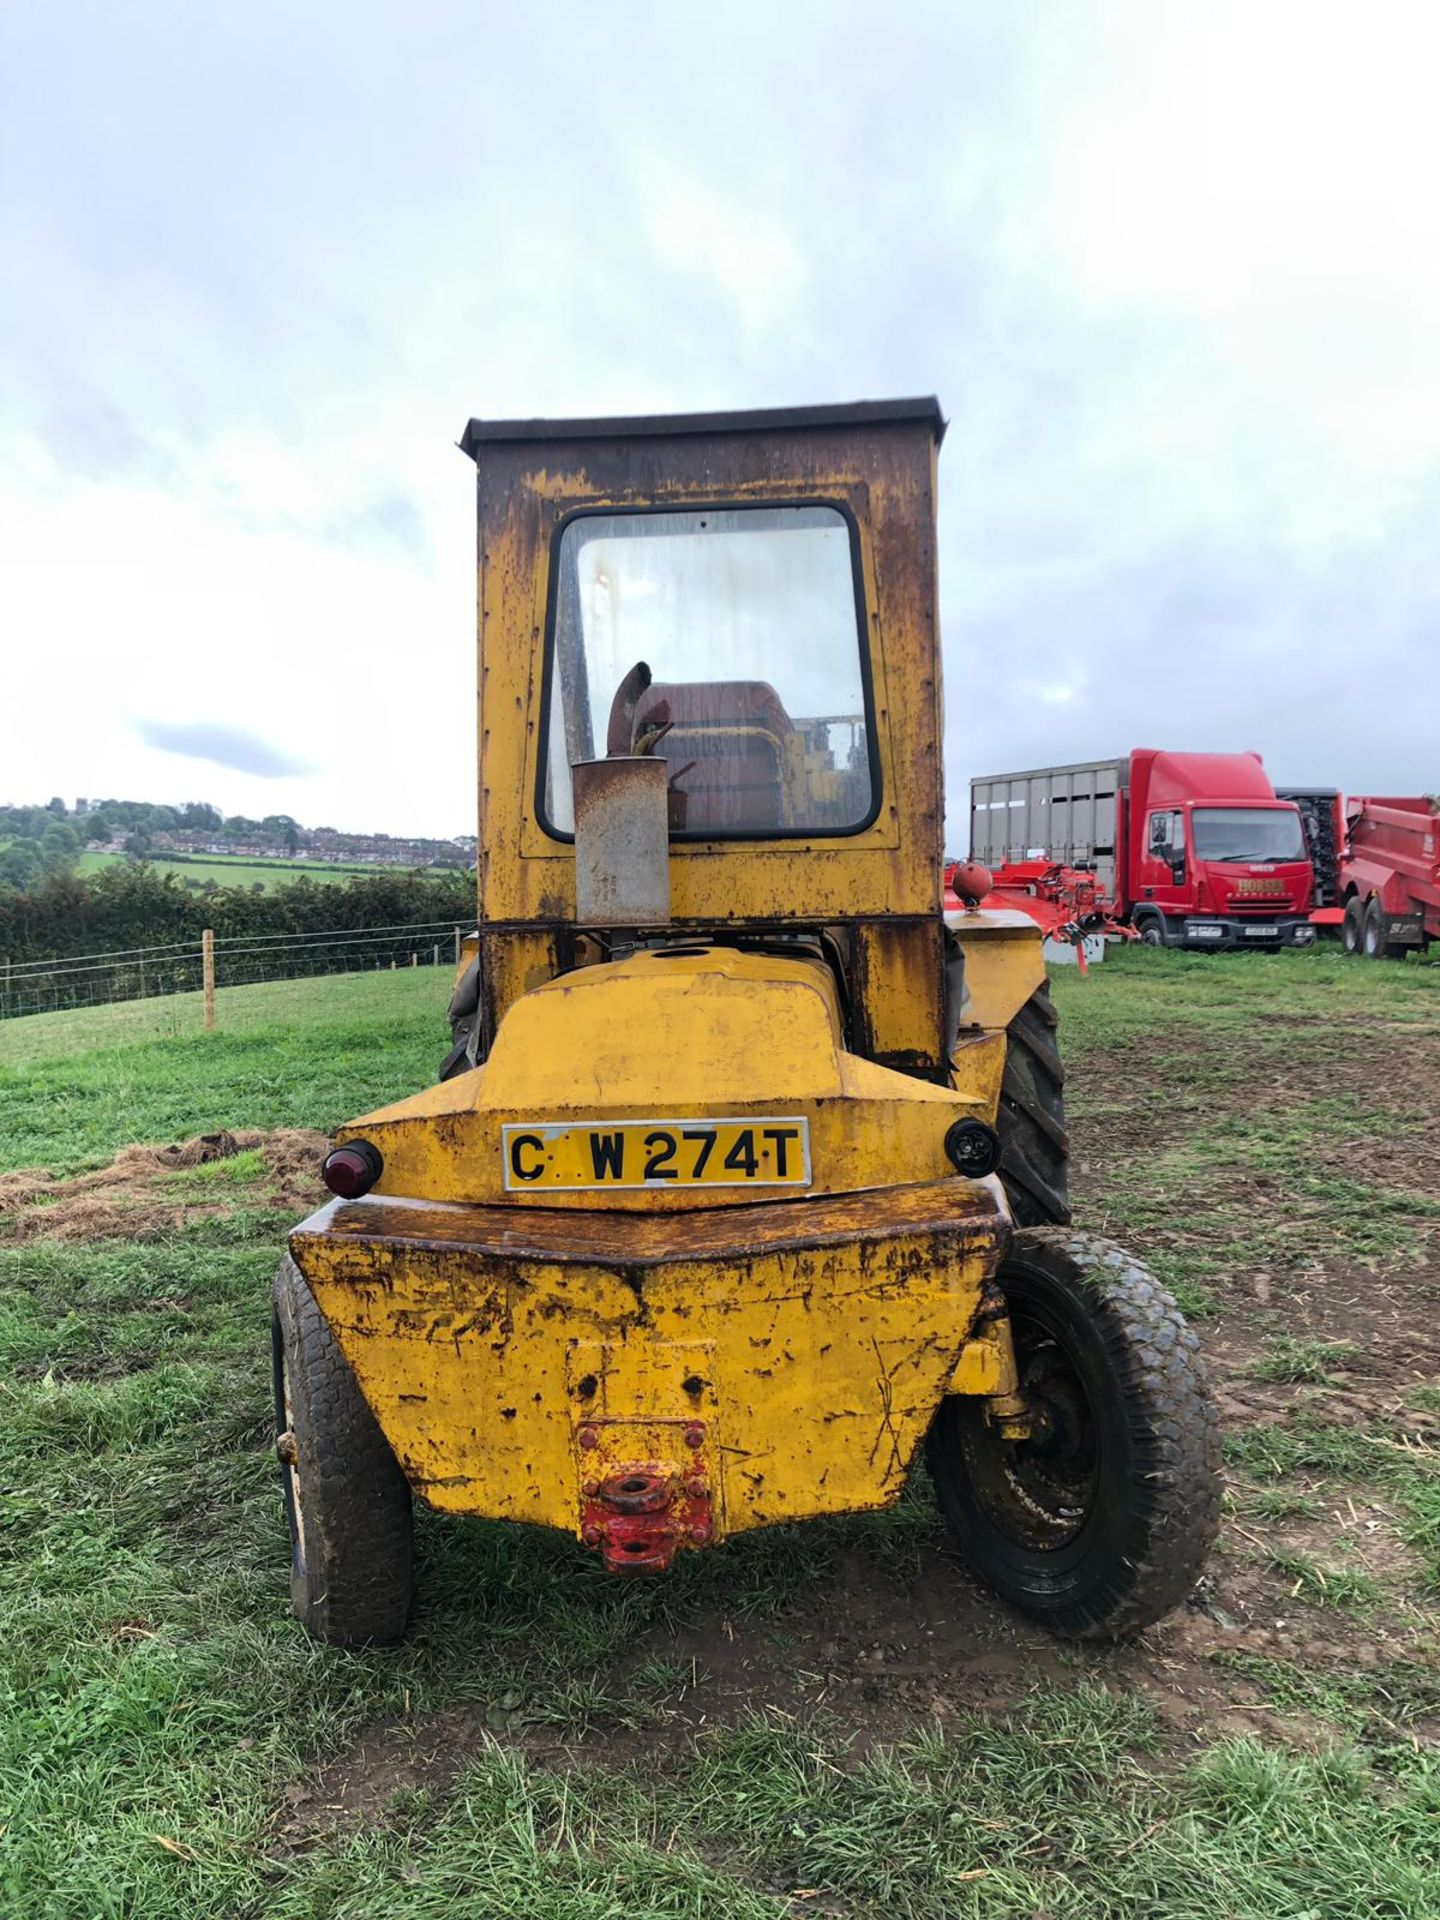 BONSER ROUGH TERRAIN FORK LIFT 3 STAGE MAST CONTAINER SPEC, RUNS WORKS AND LIFTS *NO VAT* - Image 6 of 6